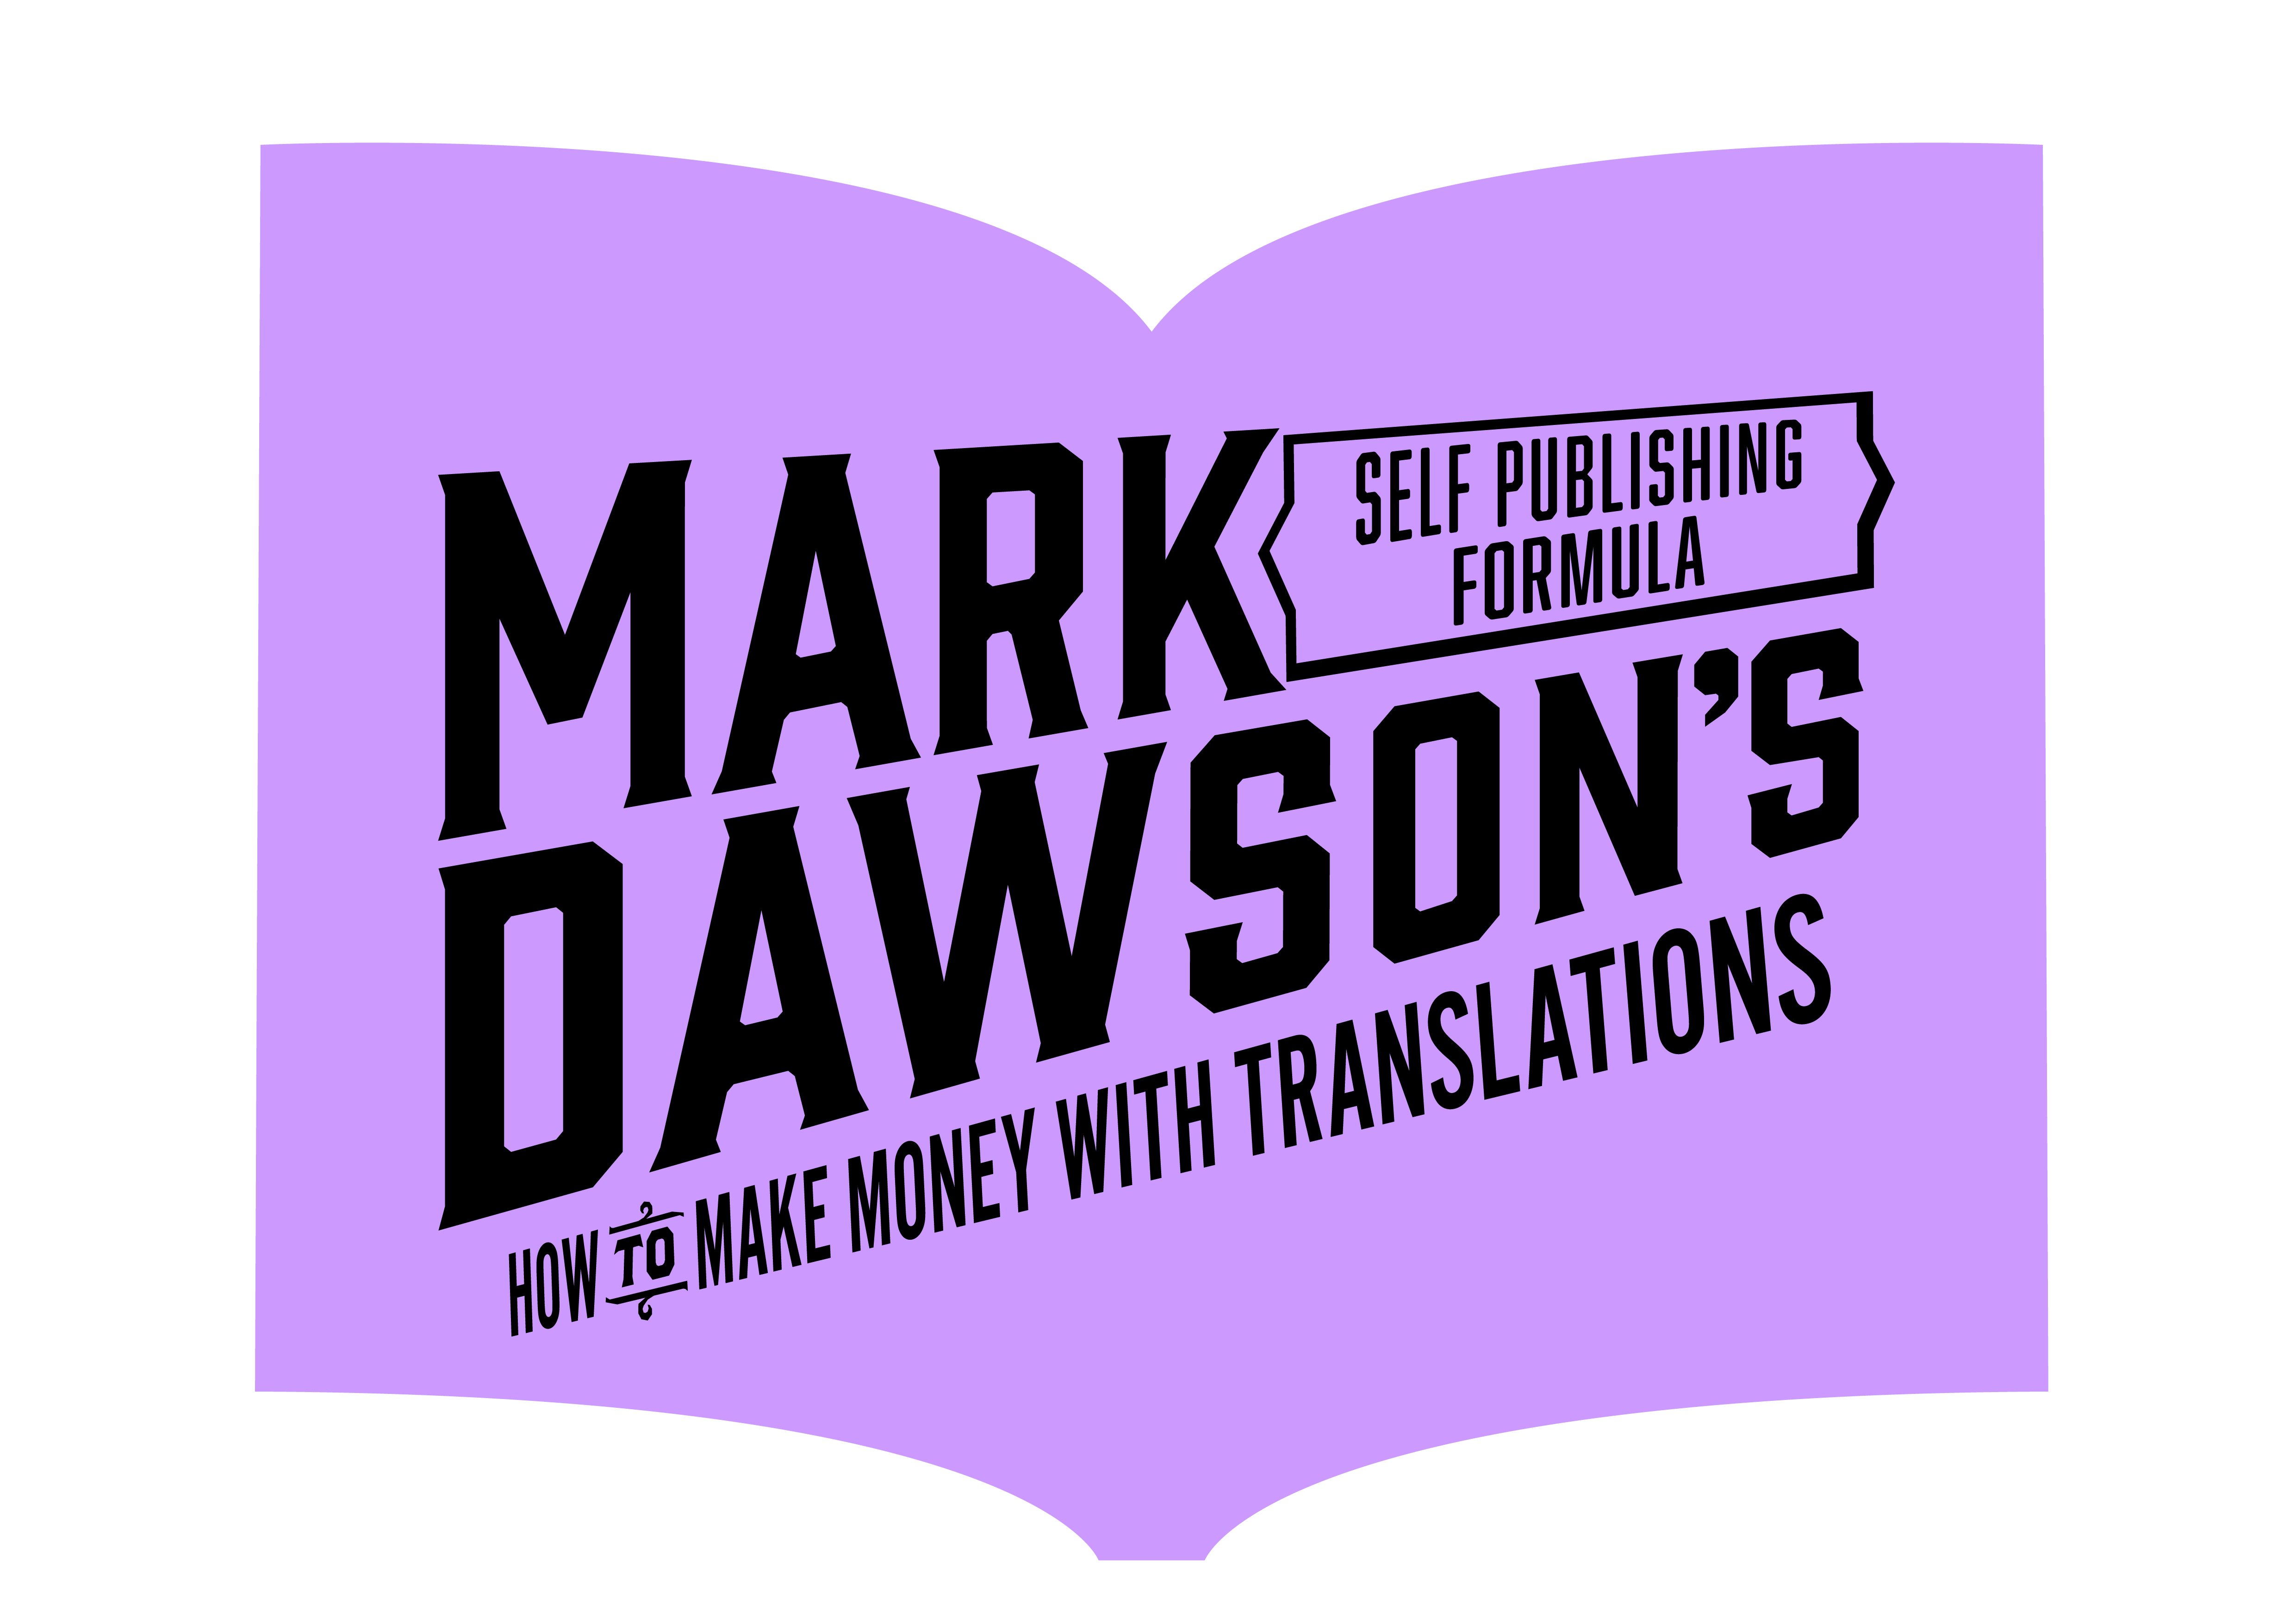 HOW TO MAKE MONEY WITH TRANSLATIONS